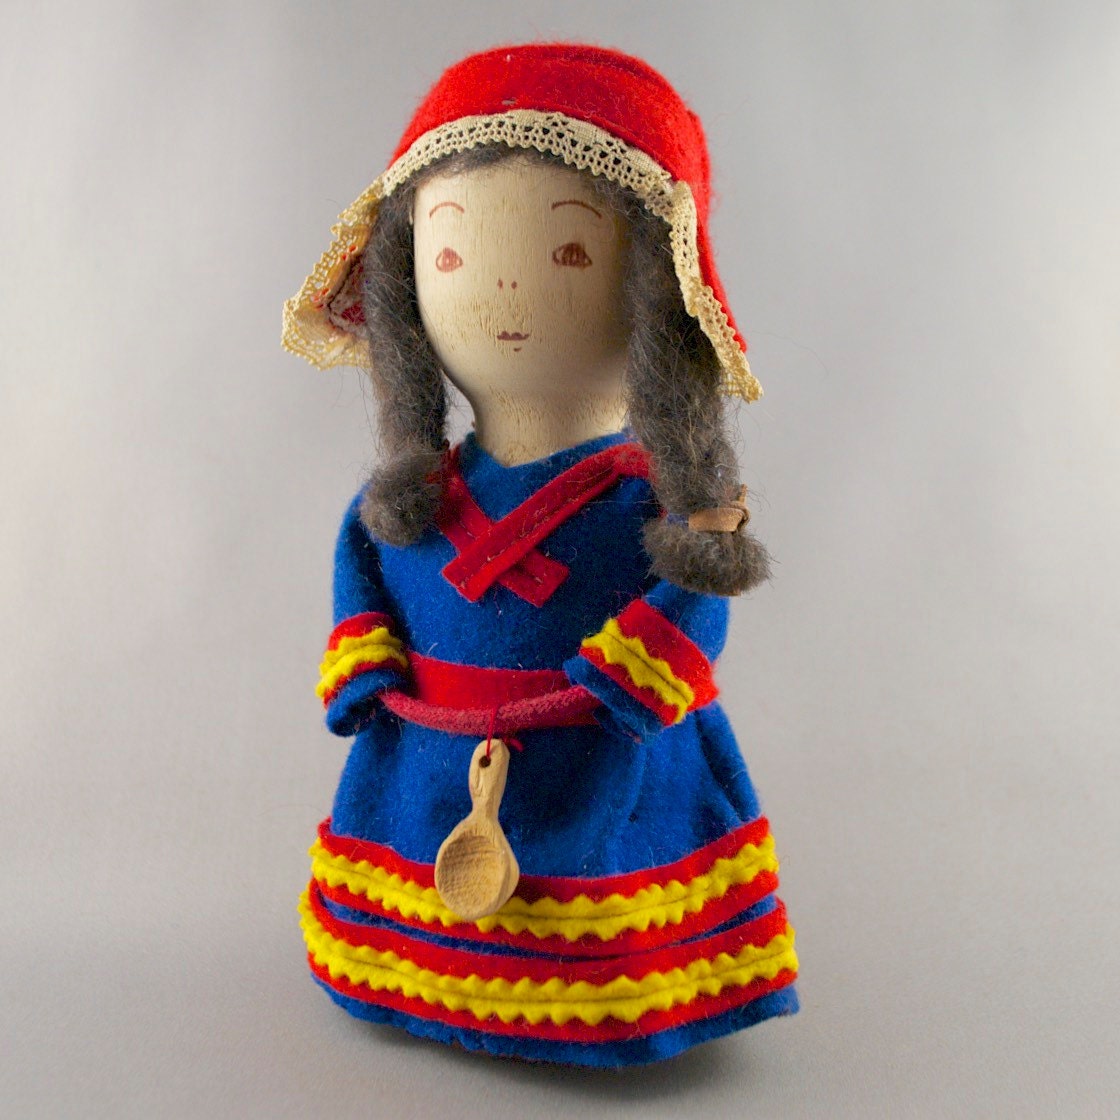 Finland Sami Lapland Vintage Wood Carved Doll in Traditional